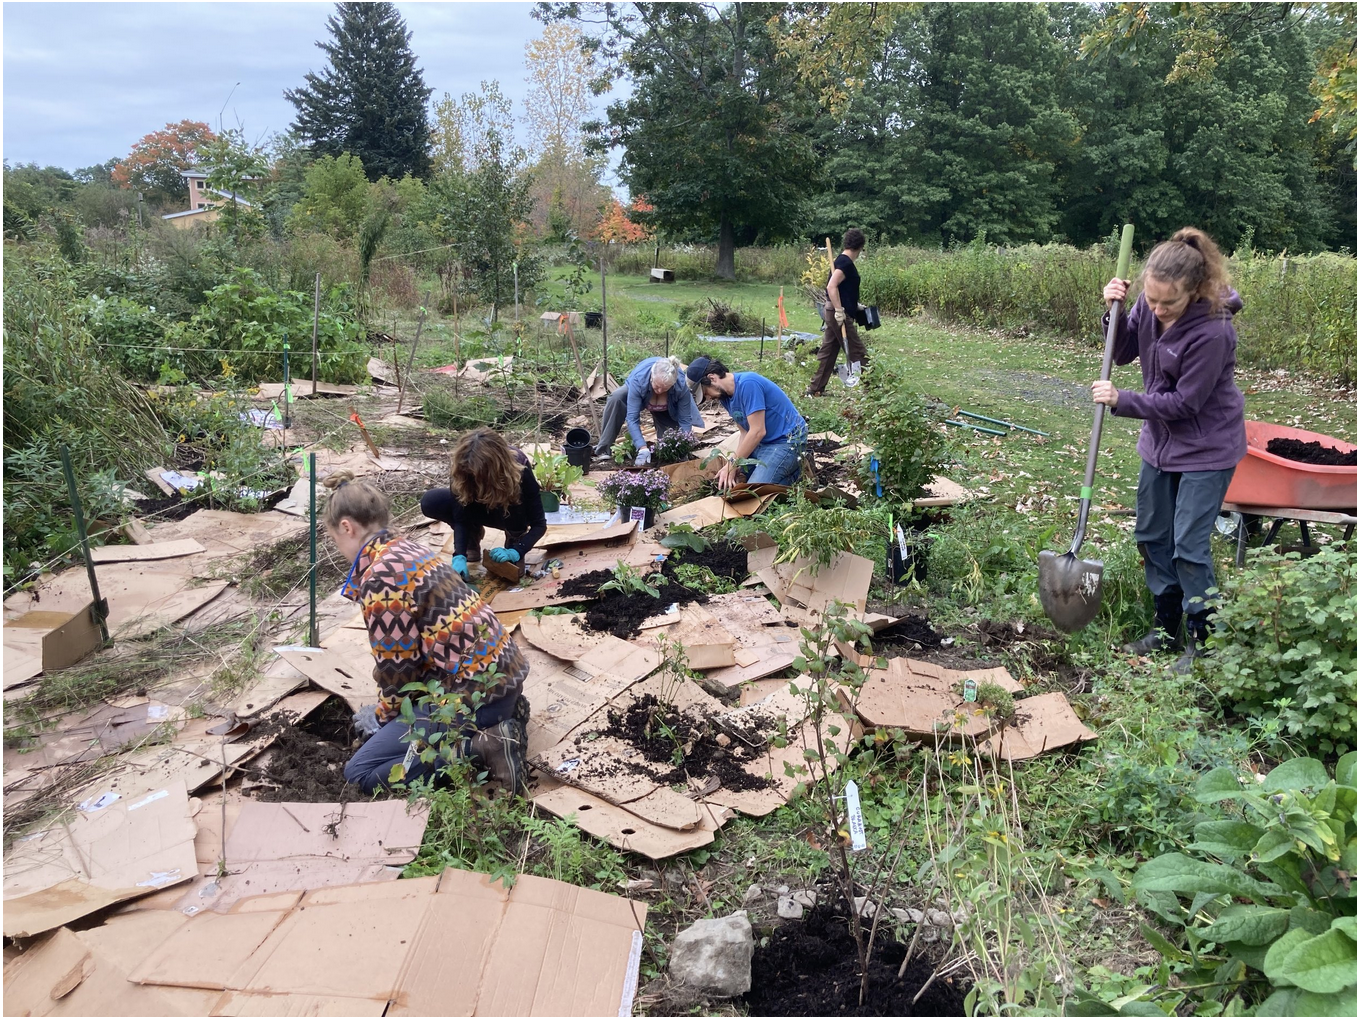 Local stewards collaborate to remediate soil in their food forest using a sheet mulching technique.